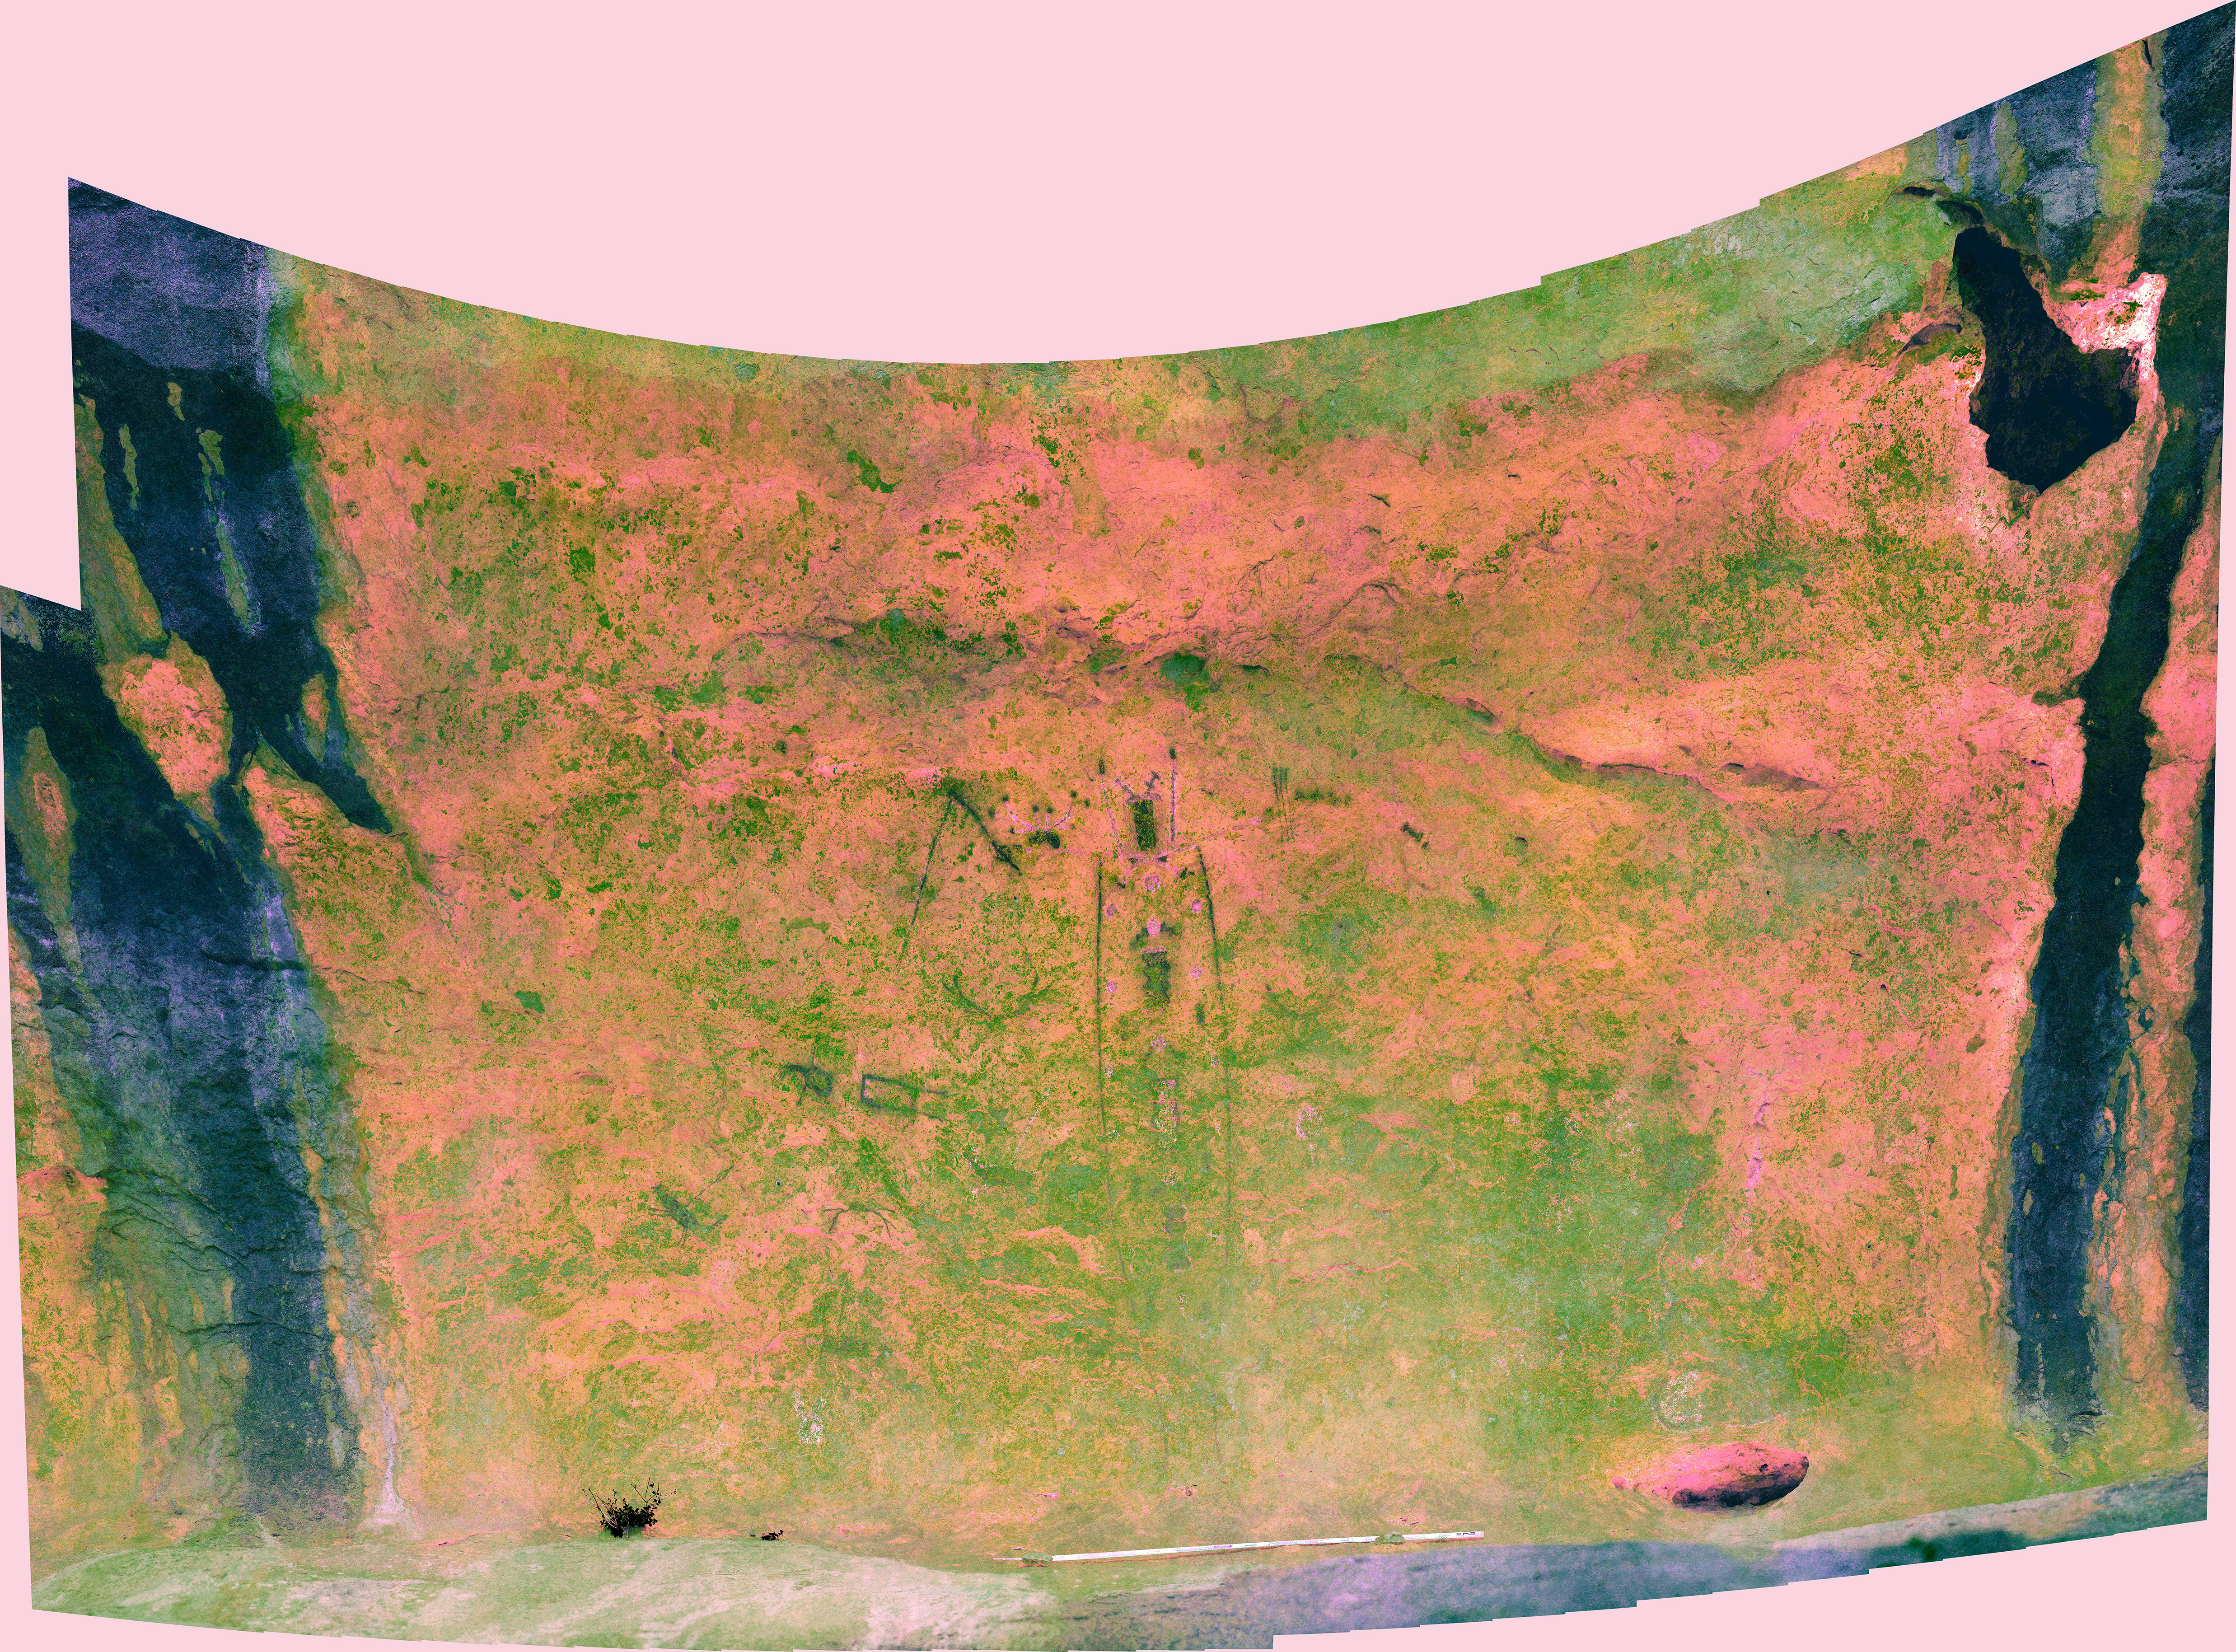 GigaPan of Black Cave Annex Section 1 enhanced with DStretch YBK channel. Click to re-direct to high-resolution image.